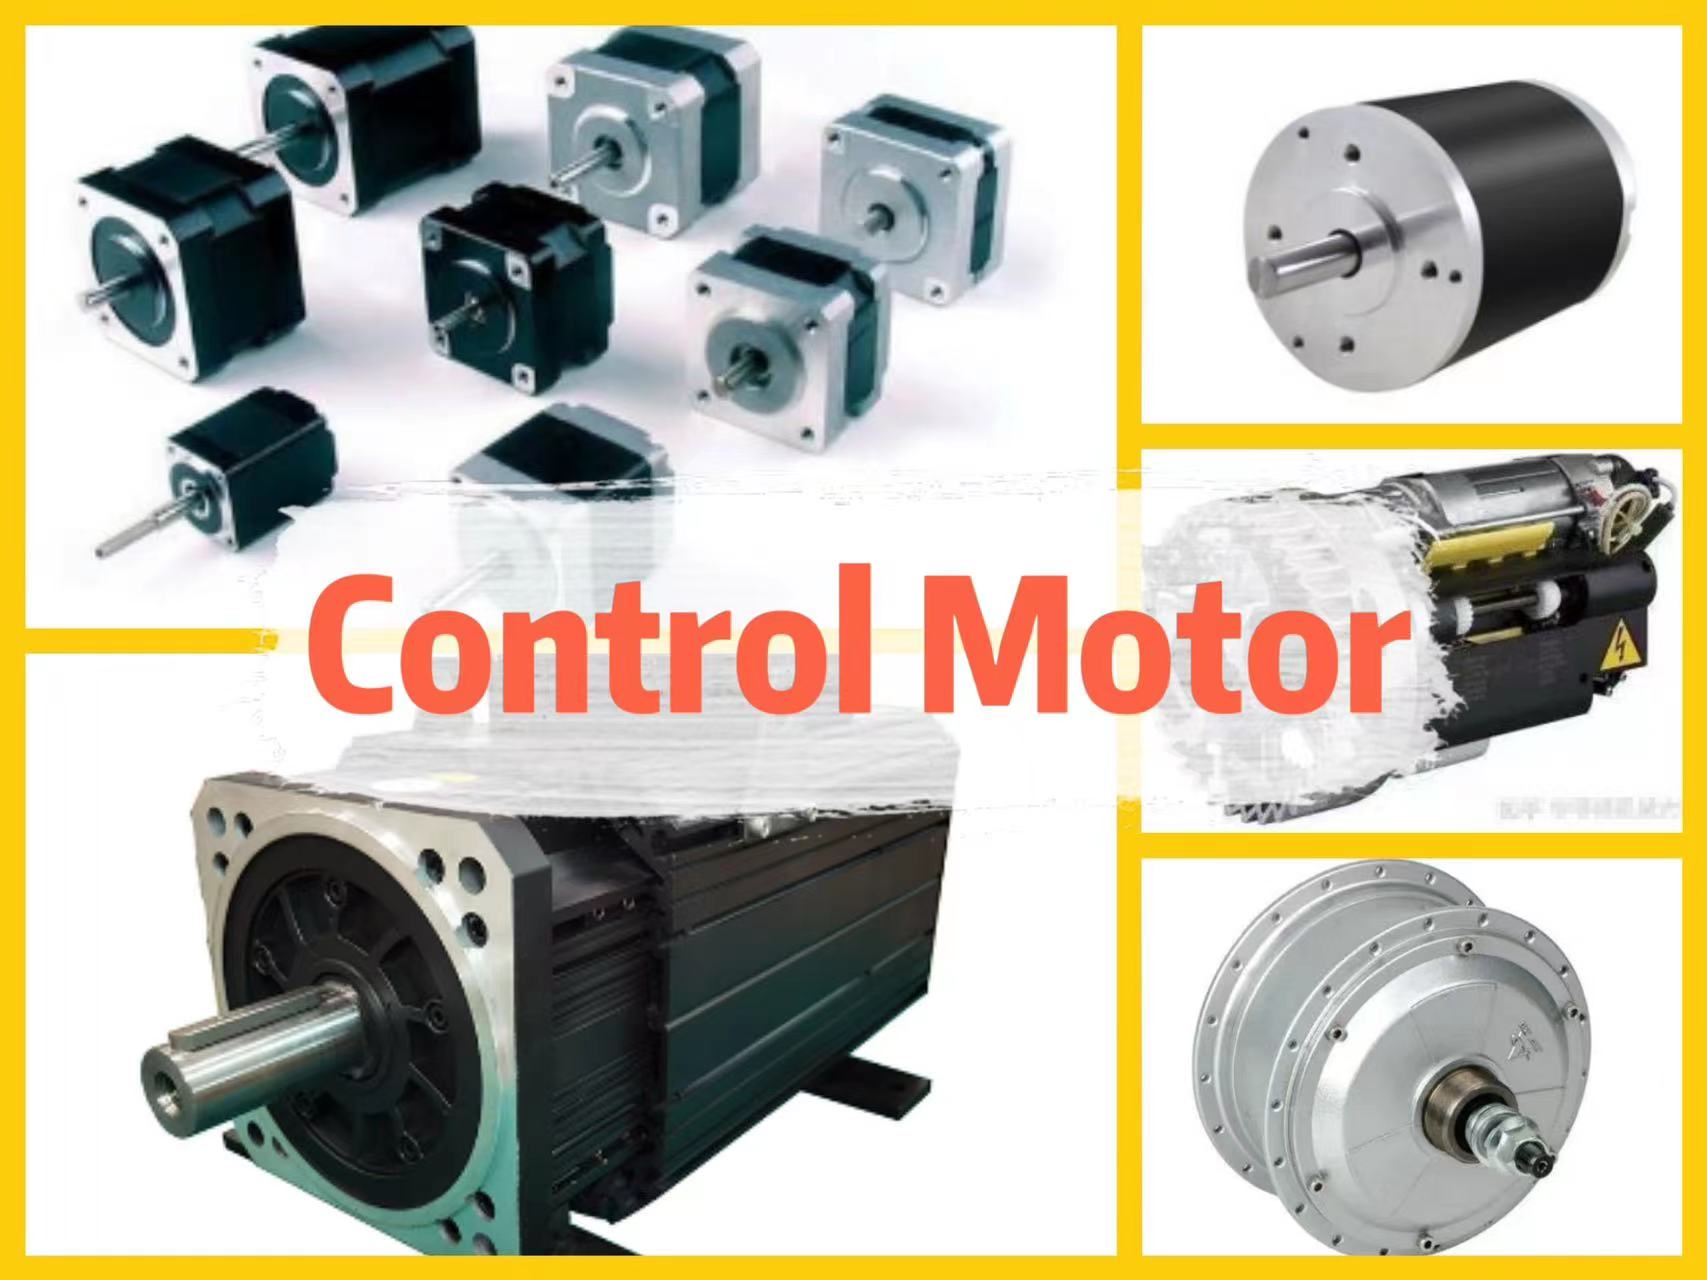 Do you know the classification of control motors?